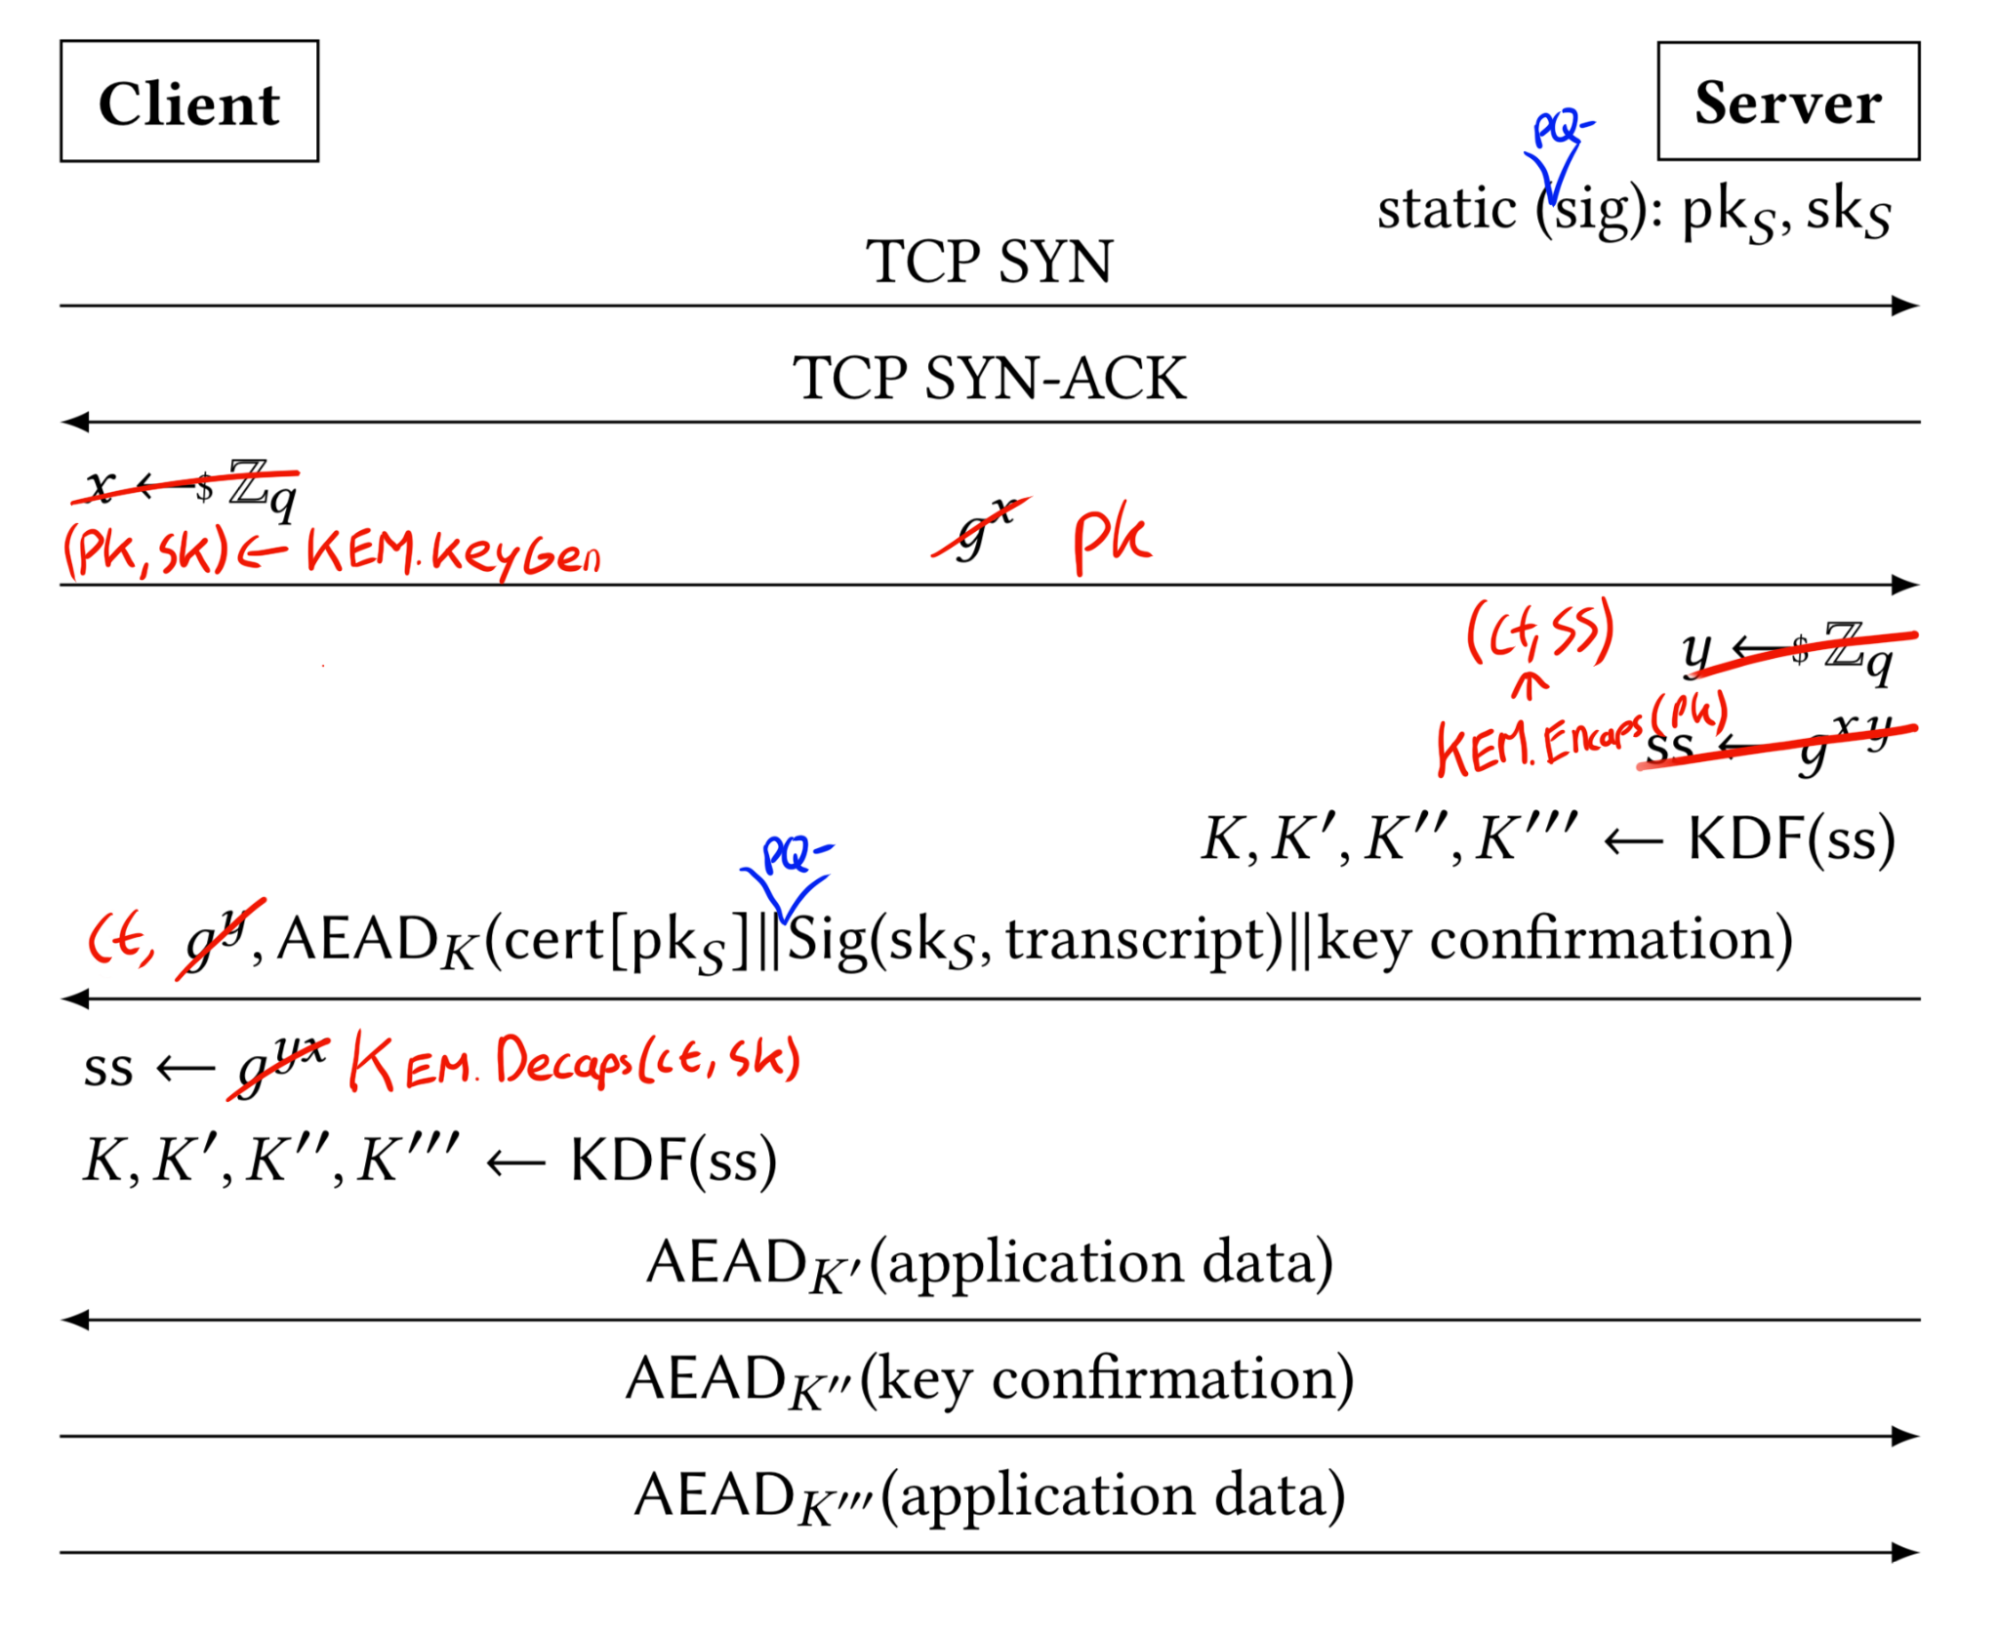 A diagrammatic overview of the TLS 1.3 handshake protocol. In the places of DH key exchange, the operations are crossed out and KEM operations are scribbled in instead. For the signature operations, “PQ-” is scribbled in, in front of “Signature”.